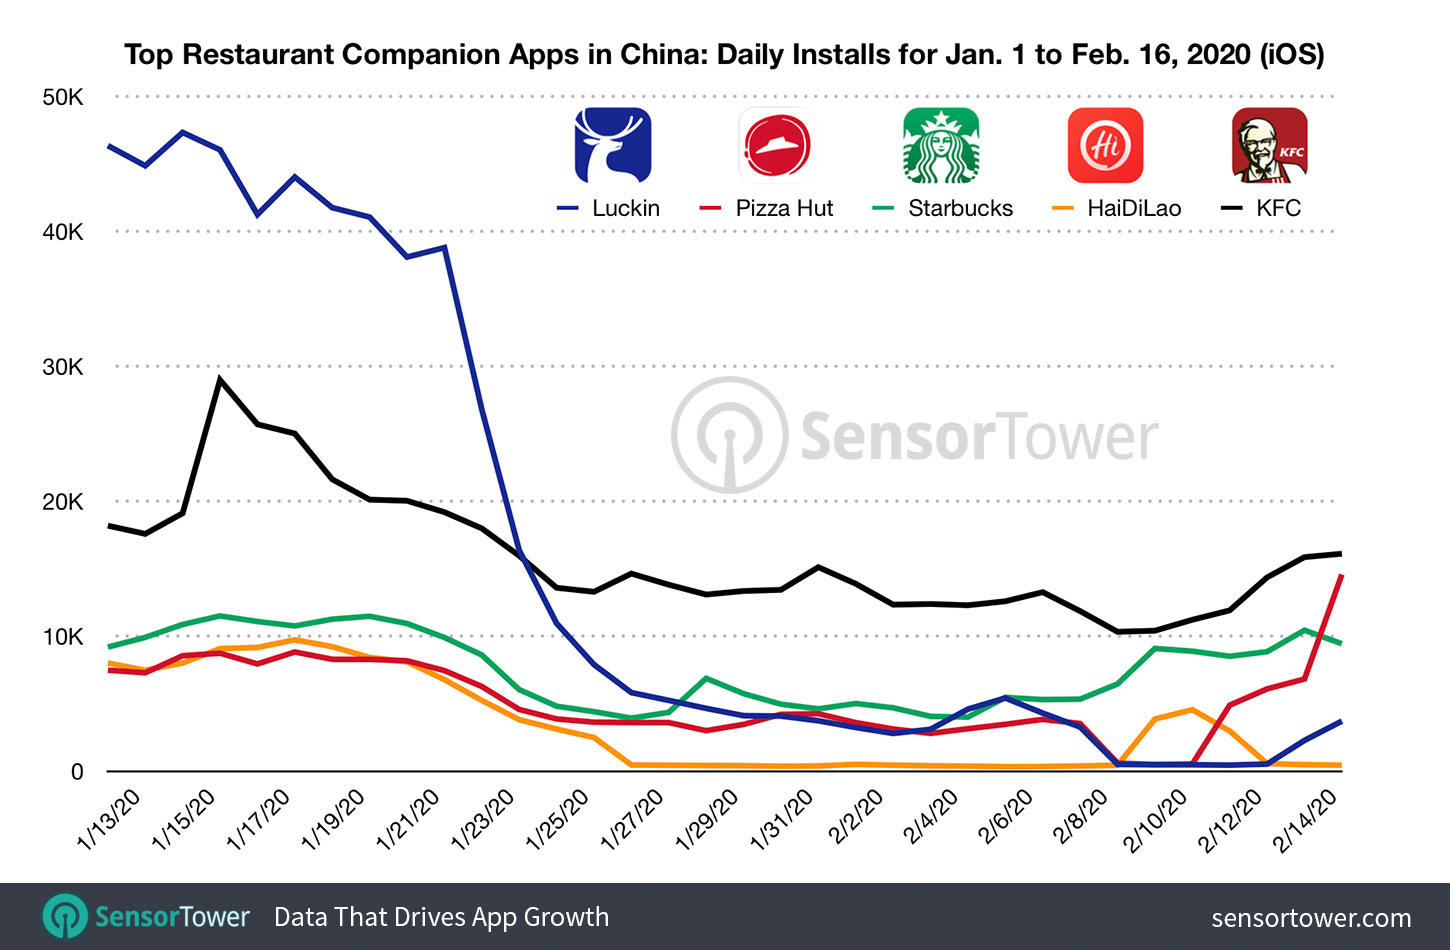 Top Restaurant Companion App Downloads in China between January 13 and February 20, 2020